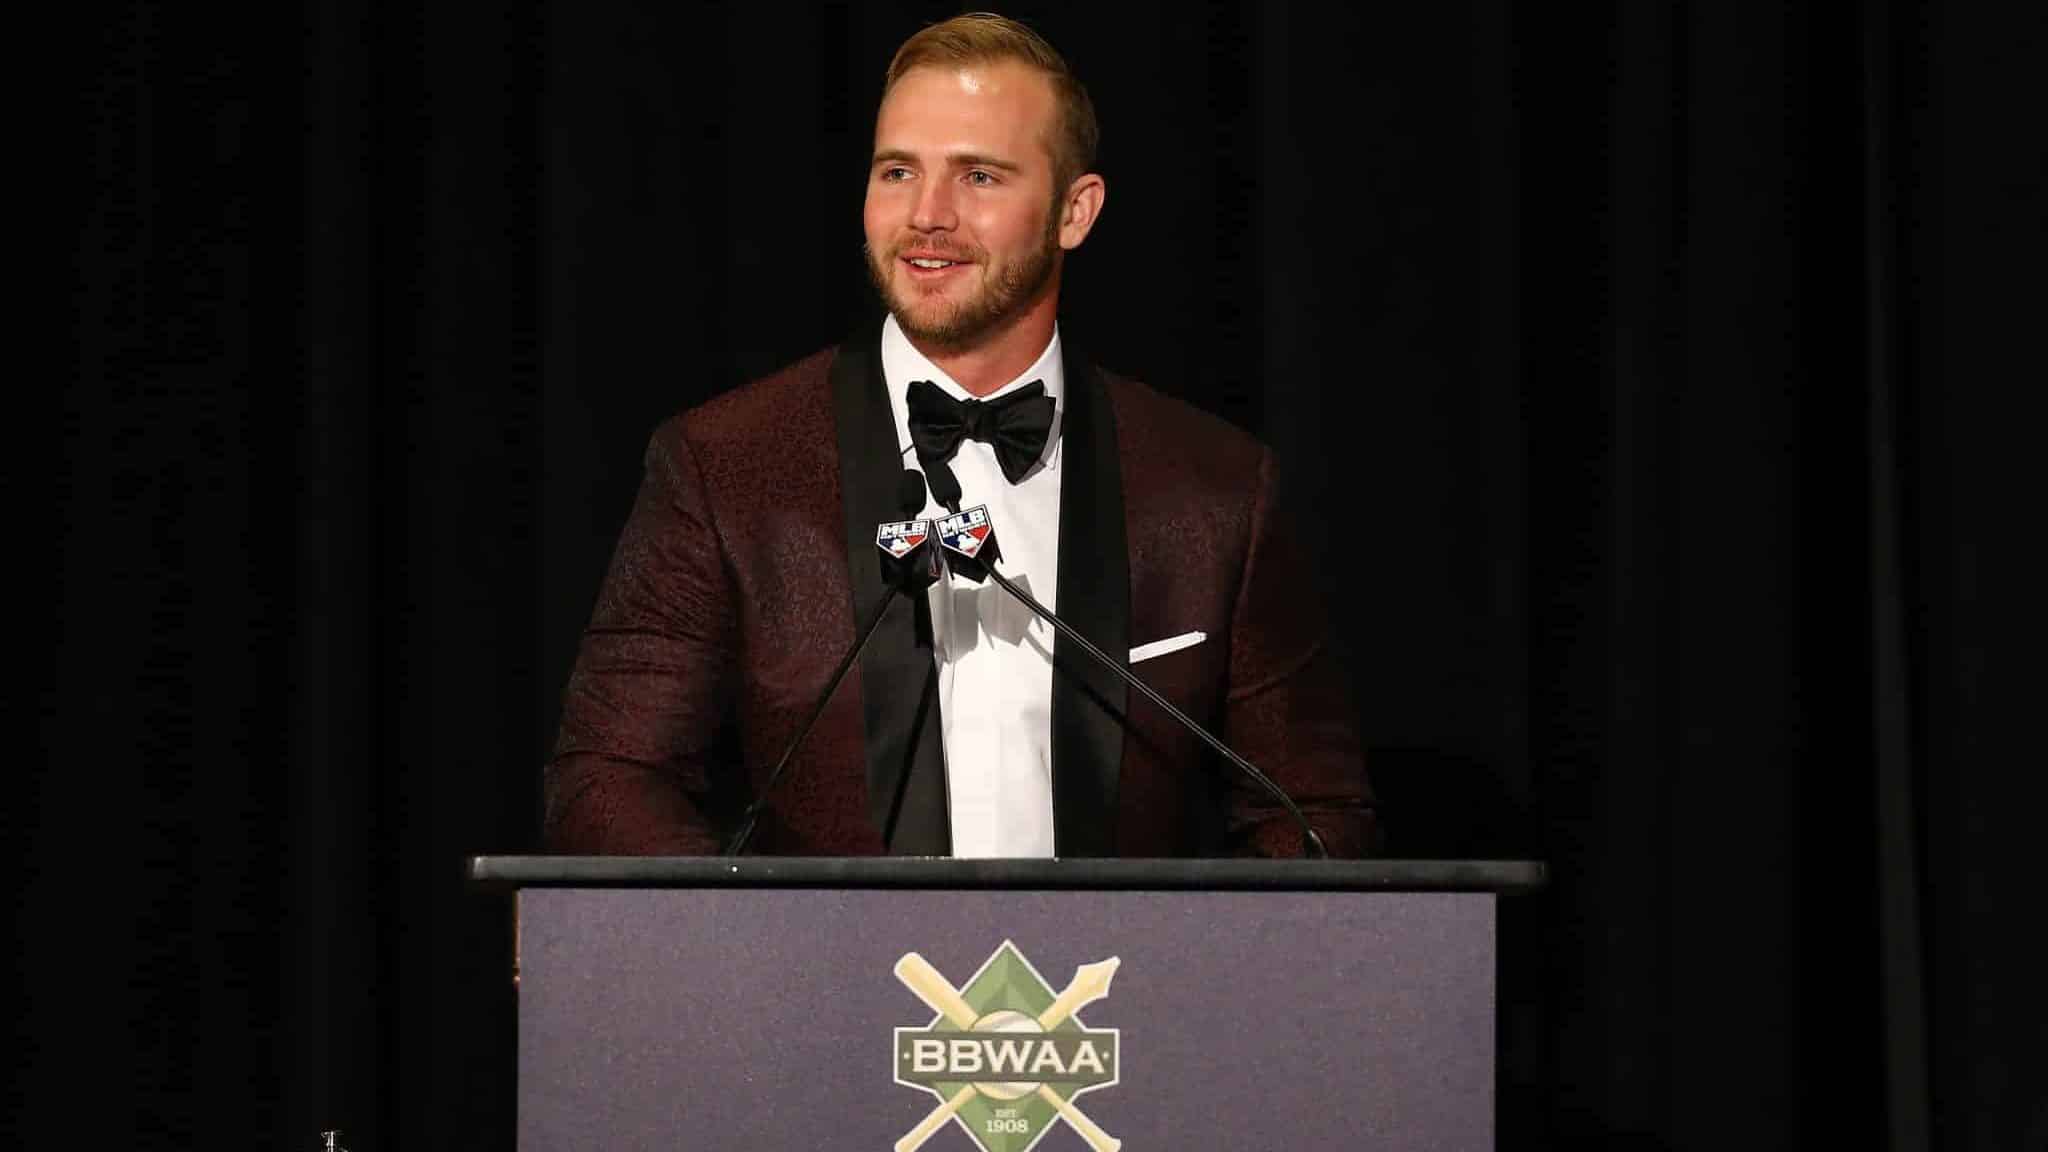 NEW YORK, NEW YORK - JANUARY 25: Pete Alonso of the New York Mets speaks after receiving his 2019 National League Rookie Of The Year Award during the 97th annual New York Baseball Writers' Dinner on January 25, 2020 Sheraton New York in New York City.